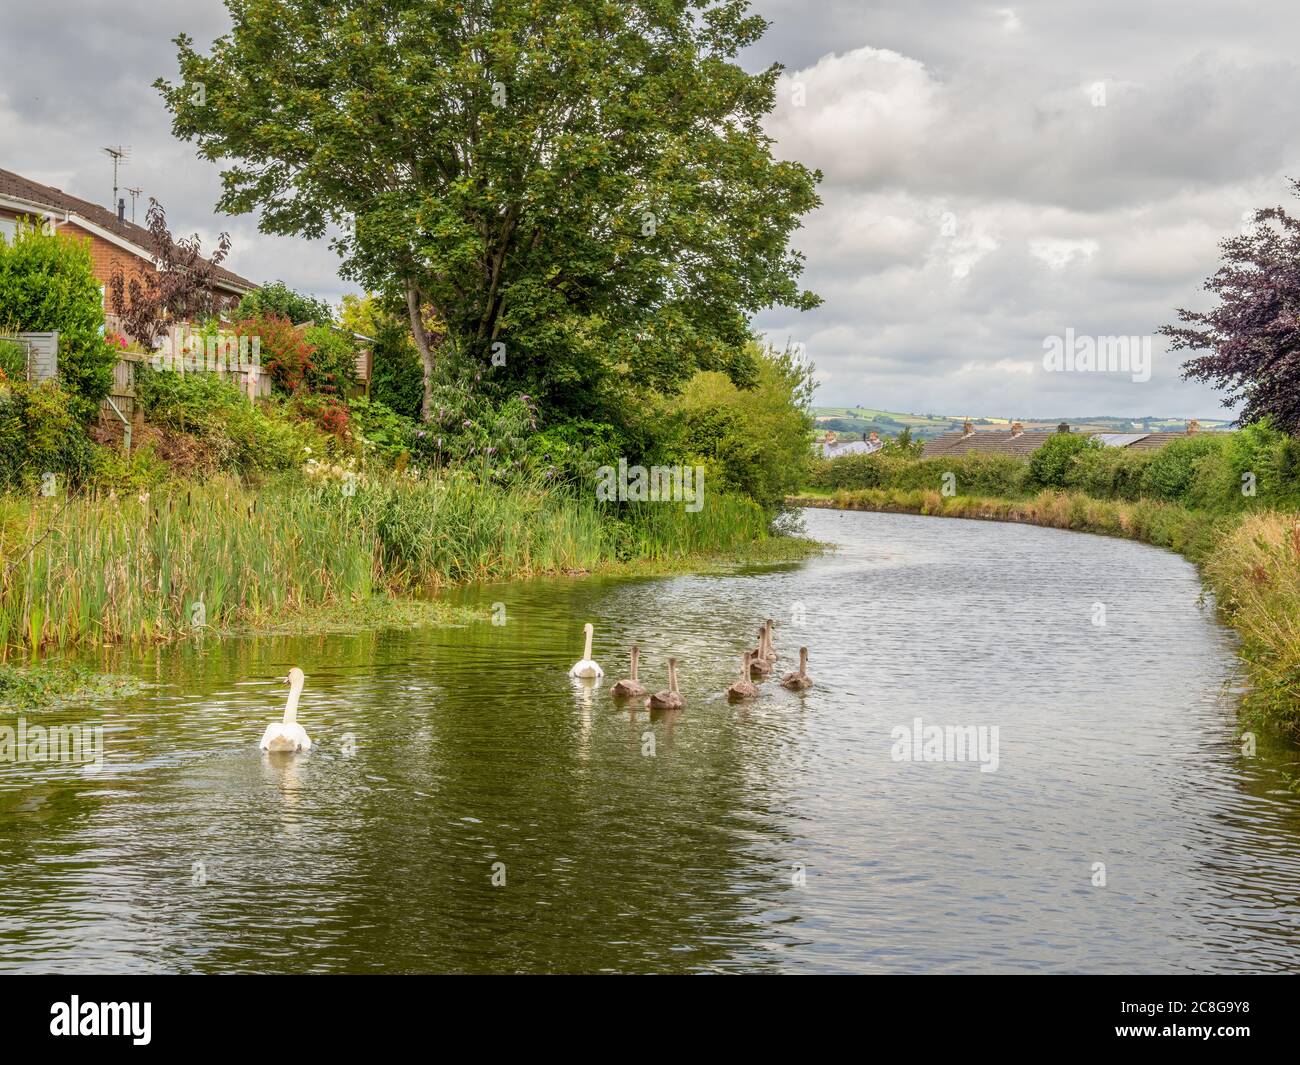 The scenic and beautiful Grand Western Canal, Tiverton, Devon, UK. With swans. Stock Photo